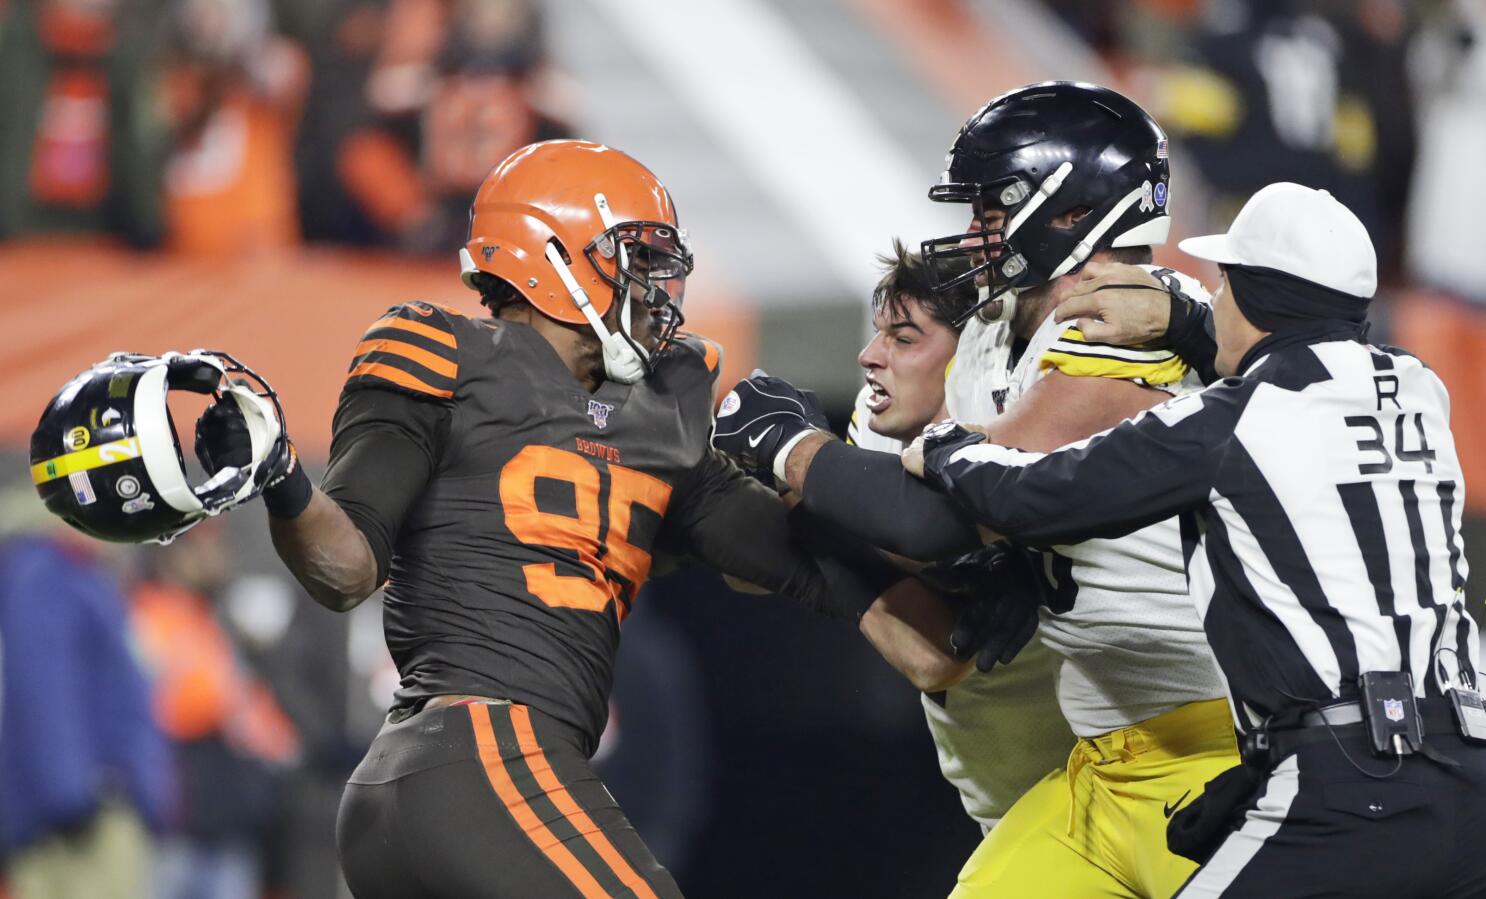 Photos: Pittsburgh Steelers' brawl with Cleveland Browns - Los Angeles Times